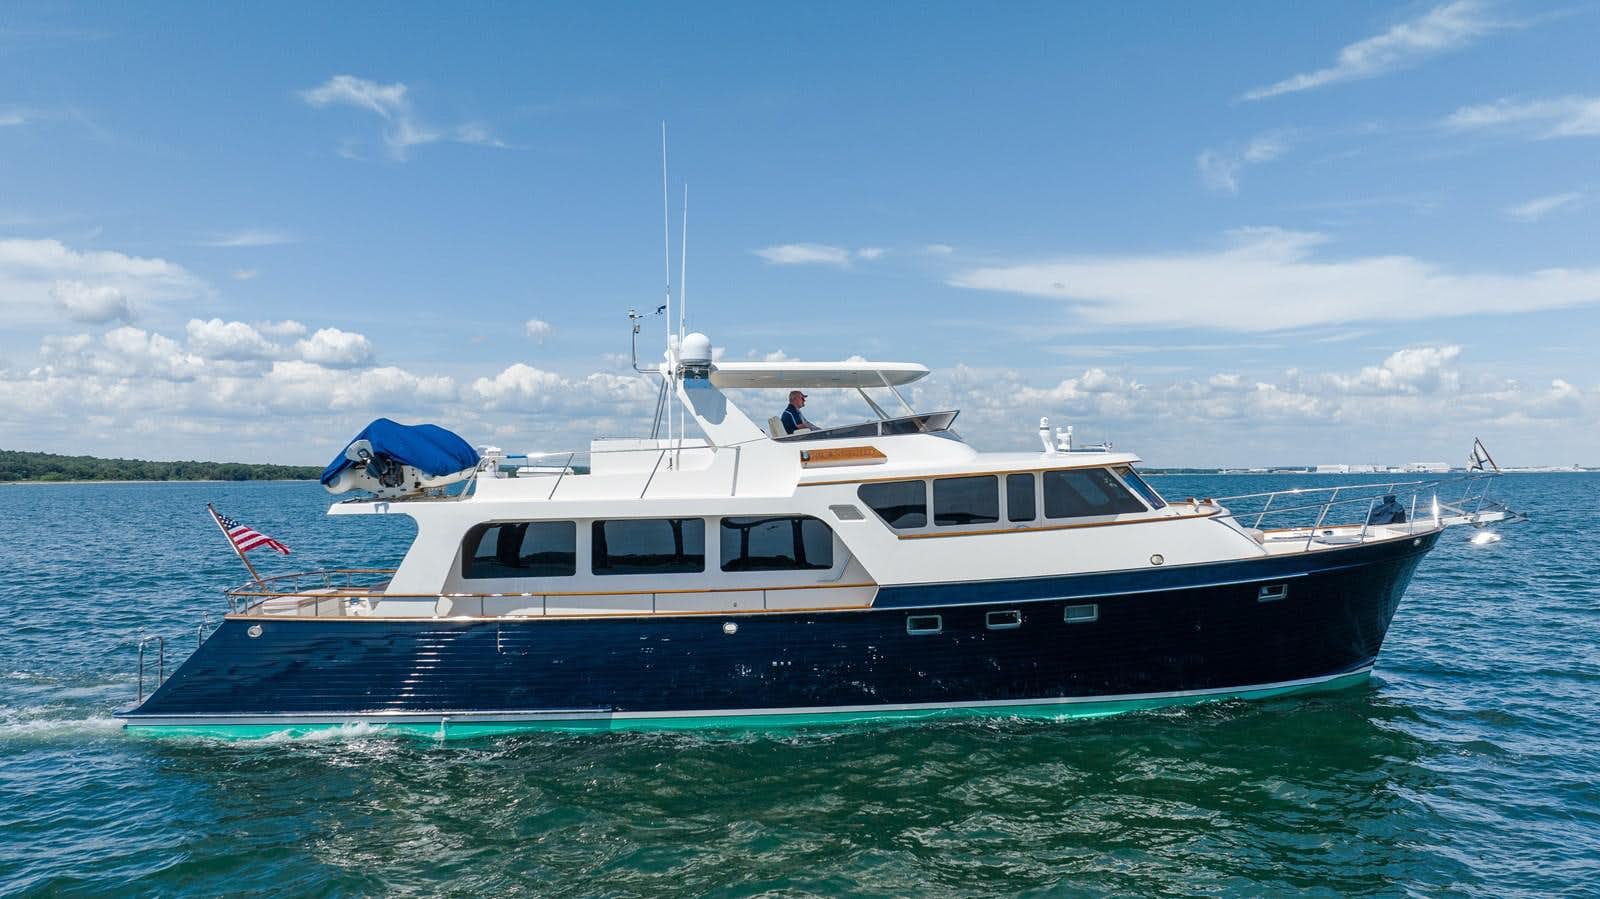 Disconnected
Yacht for Sale